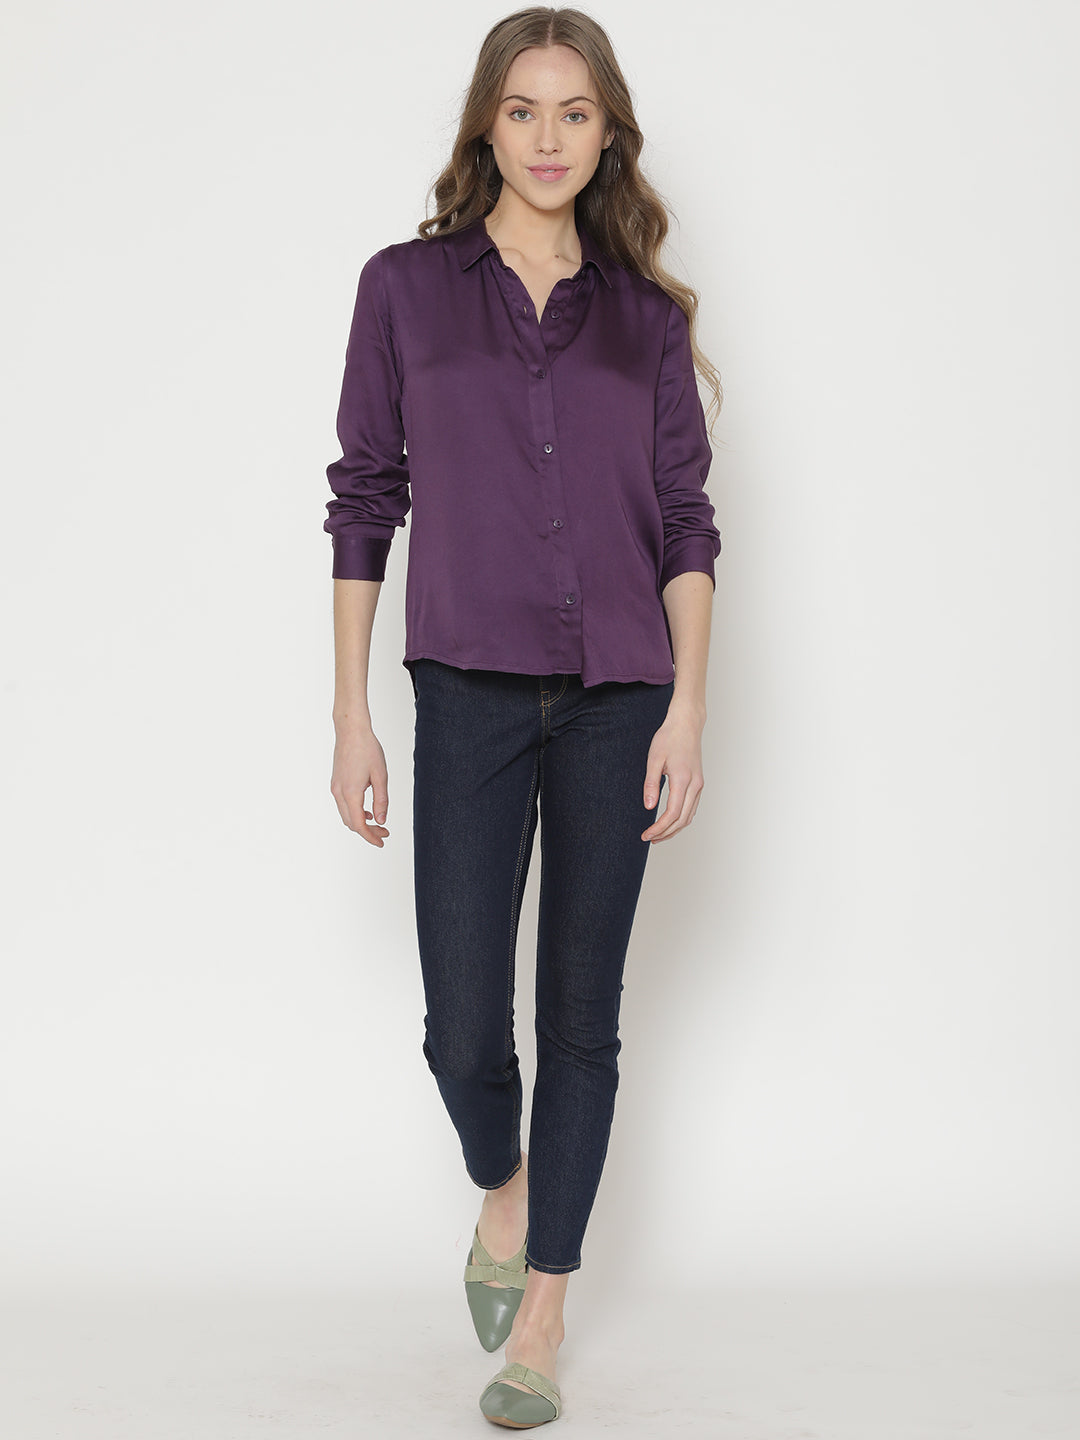 Solly Jeans Co Shirts, Allen Solly Purple Shirt for Men at Allensolly.com